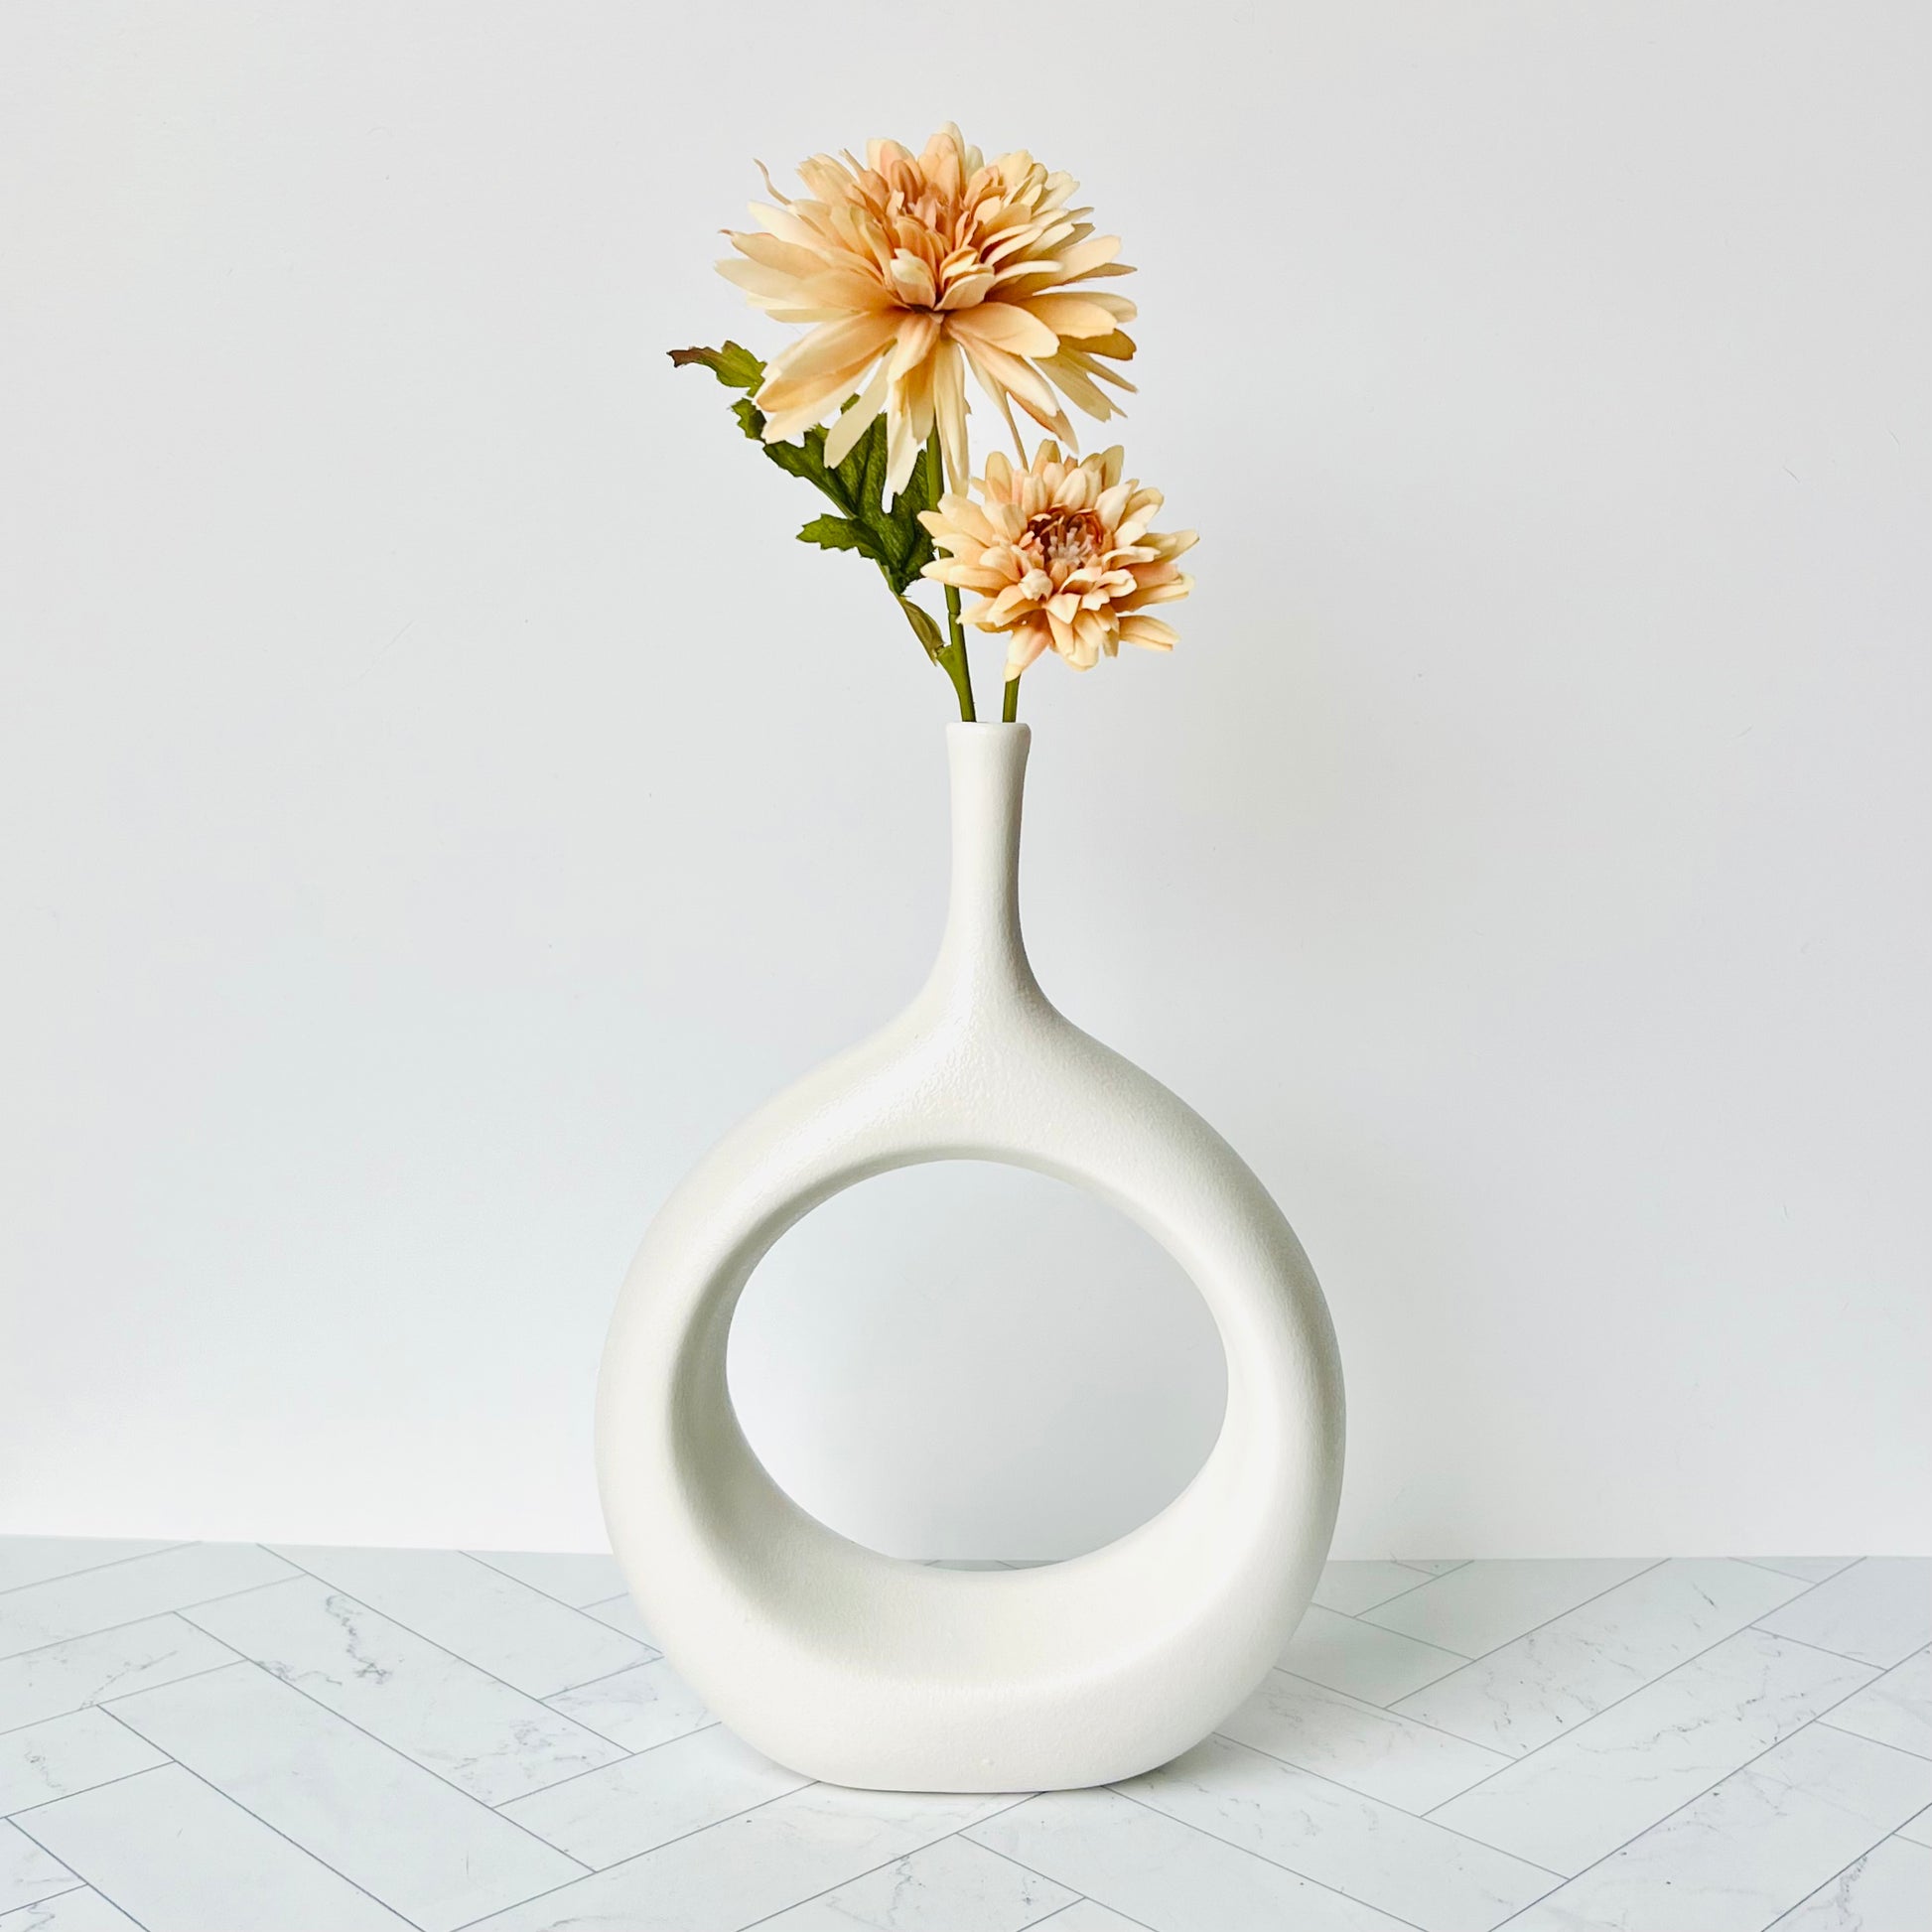 The Hollow Round Vase filled with a peach-colored flower - Humble Abode